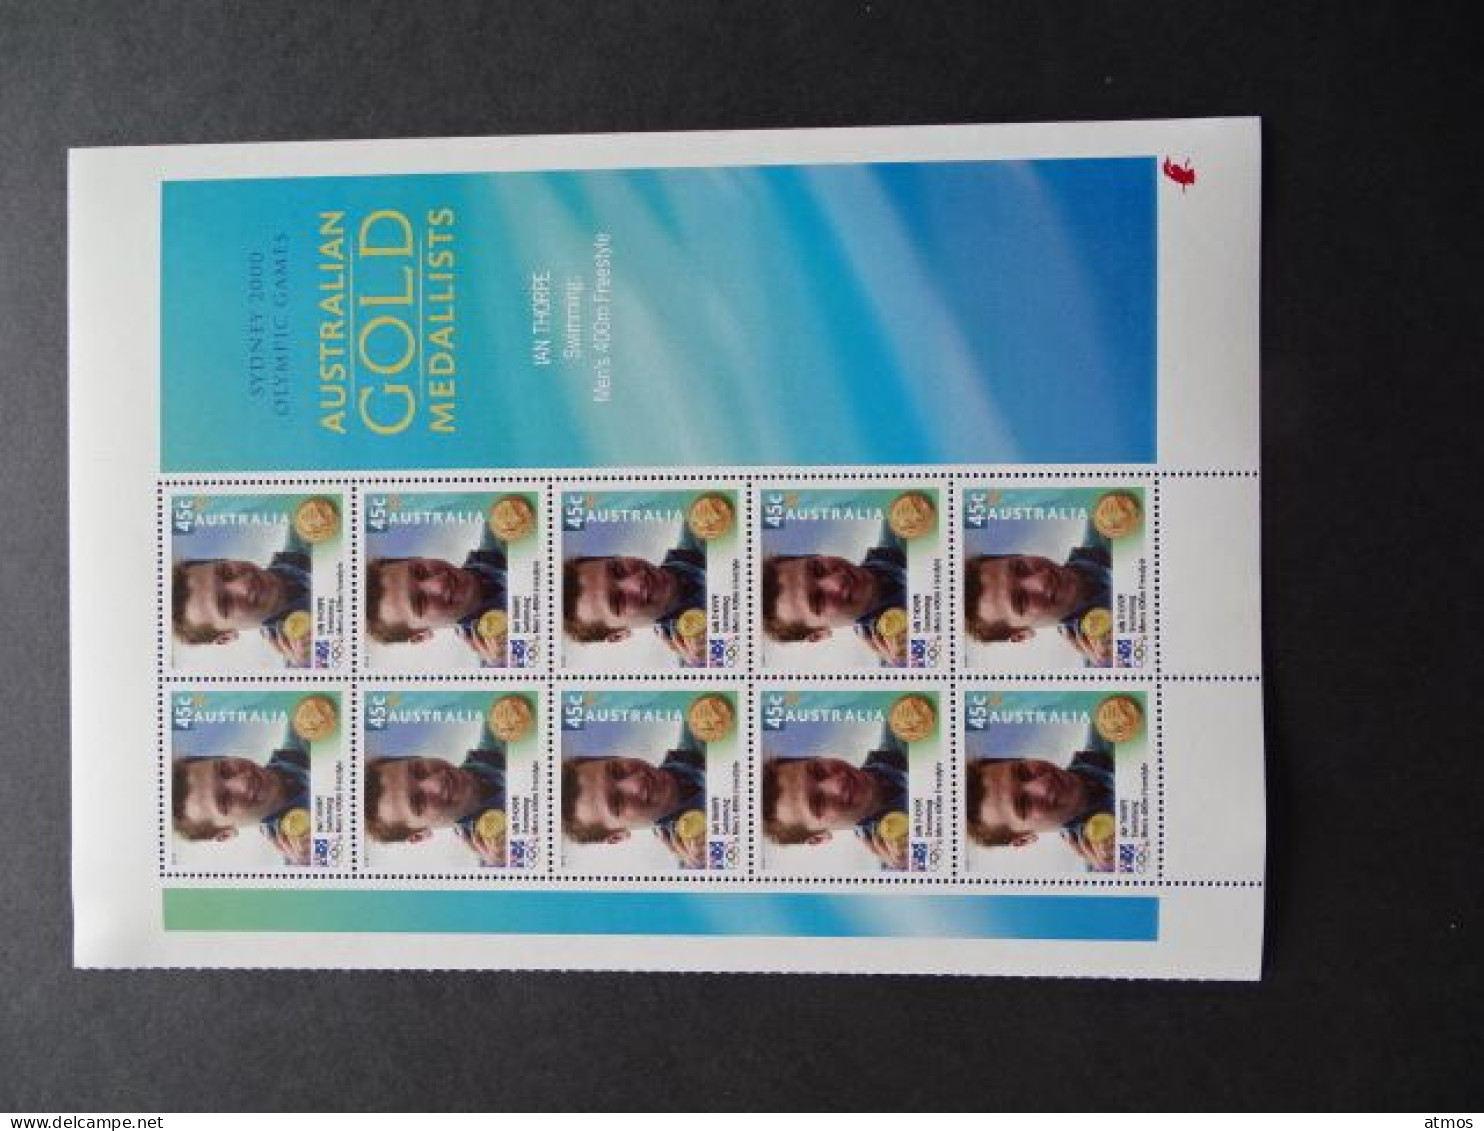 Australia MNH Michel Nr 1973 Sheet Of 10 From  2000 ACT - Mint Stamps